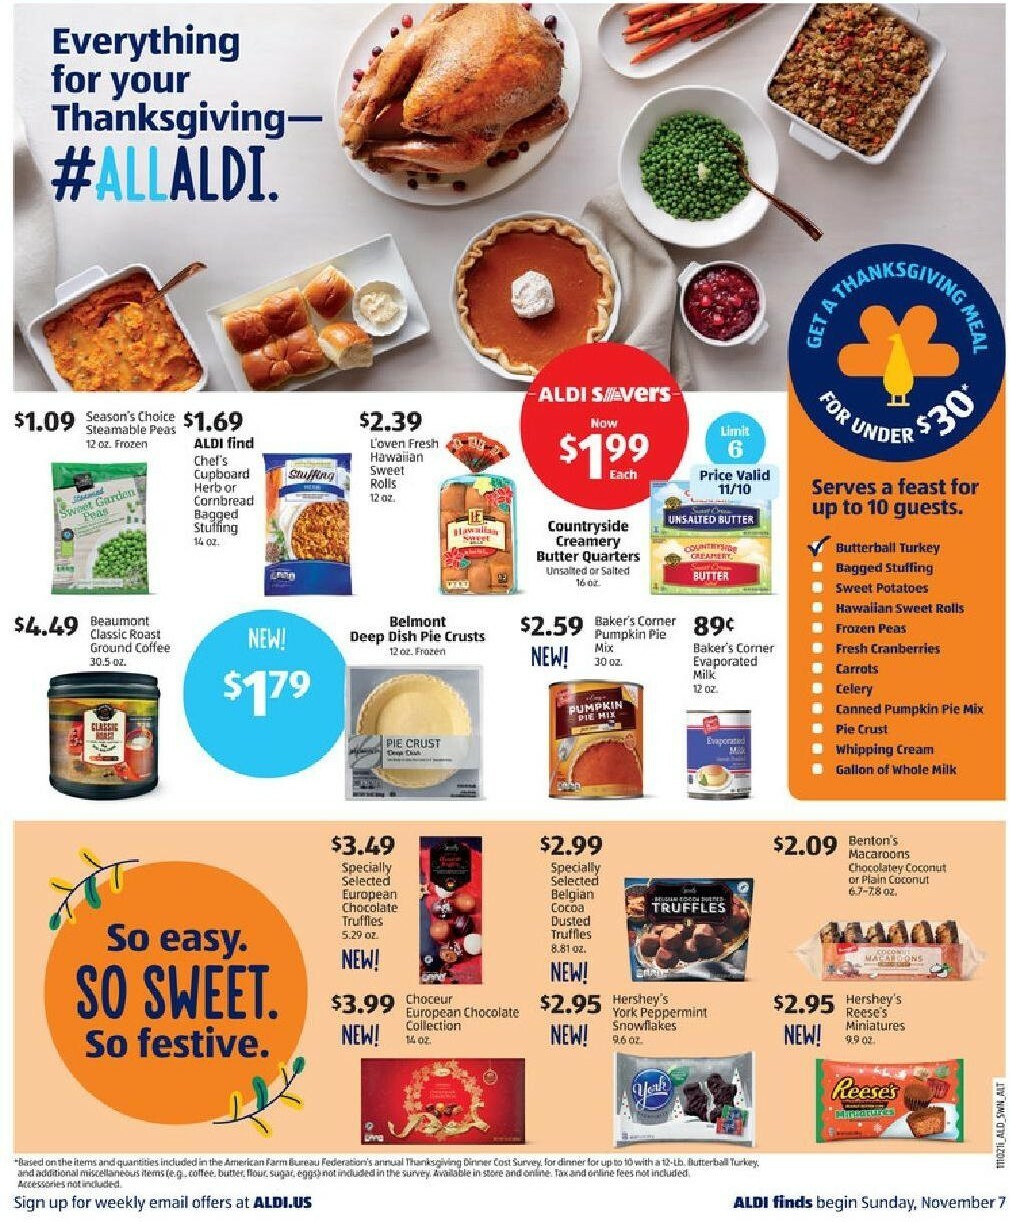 ALDI Weekly Ad from November 7